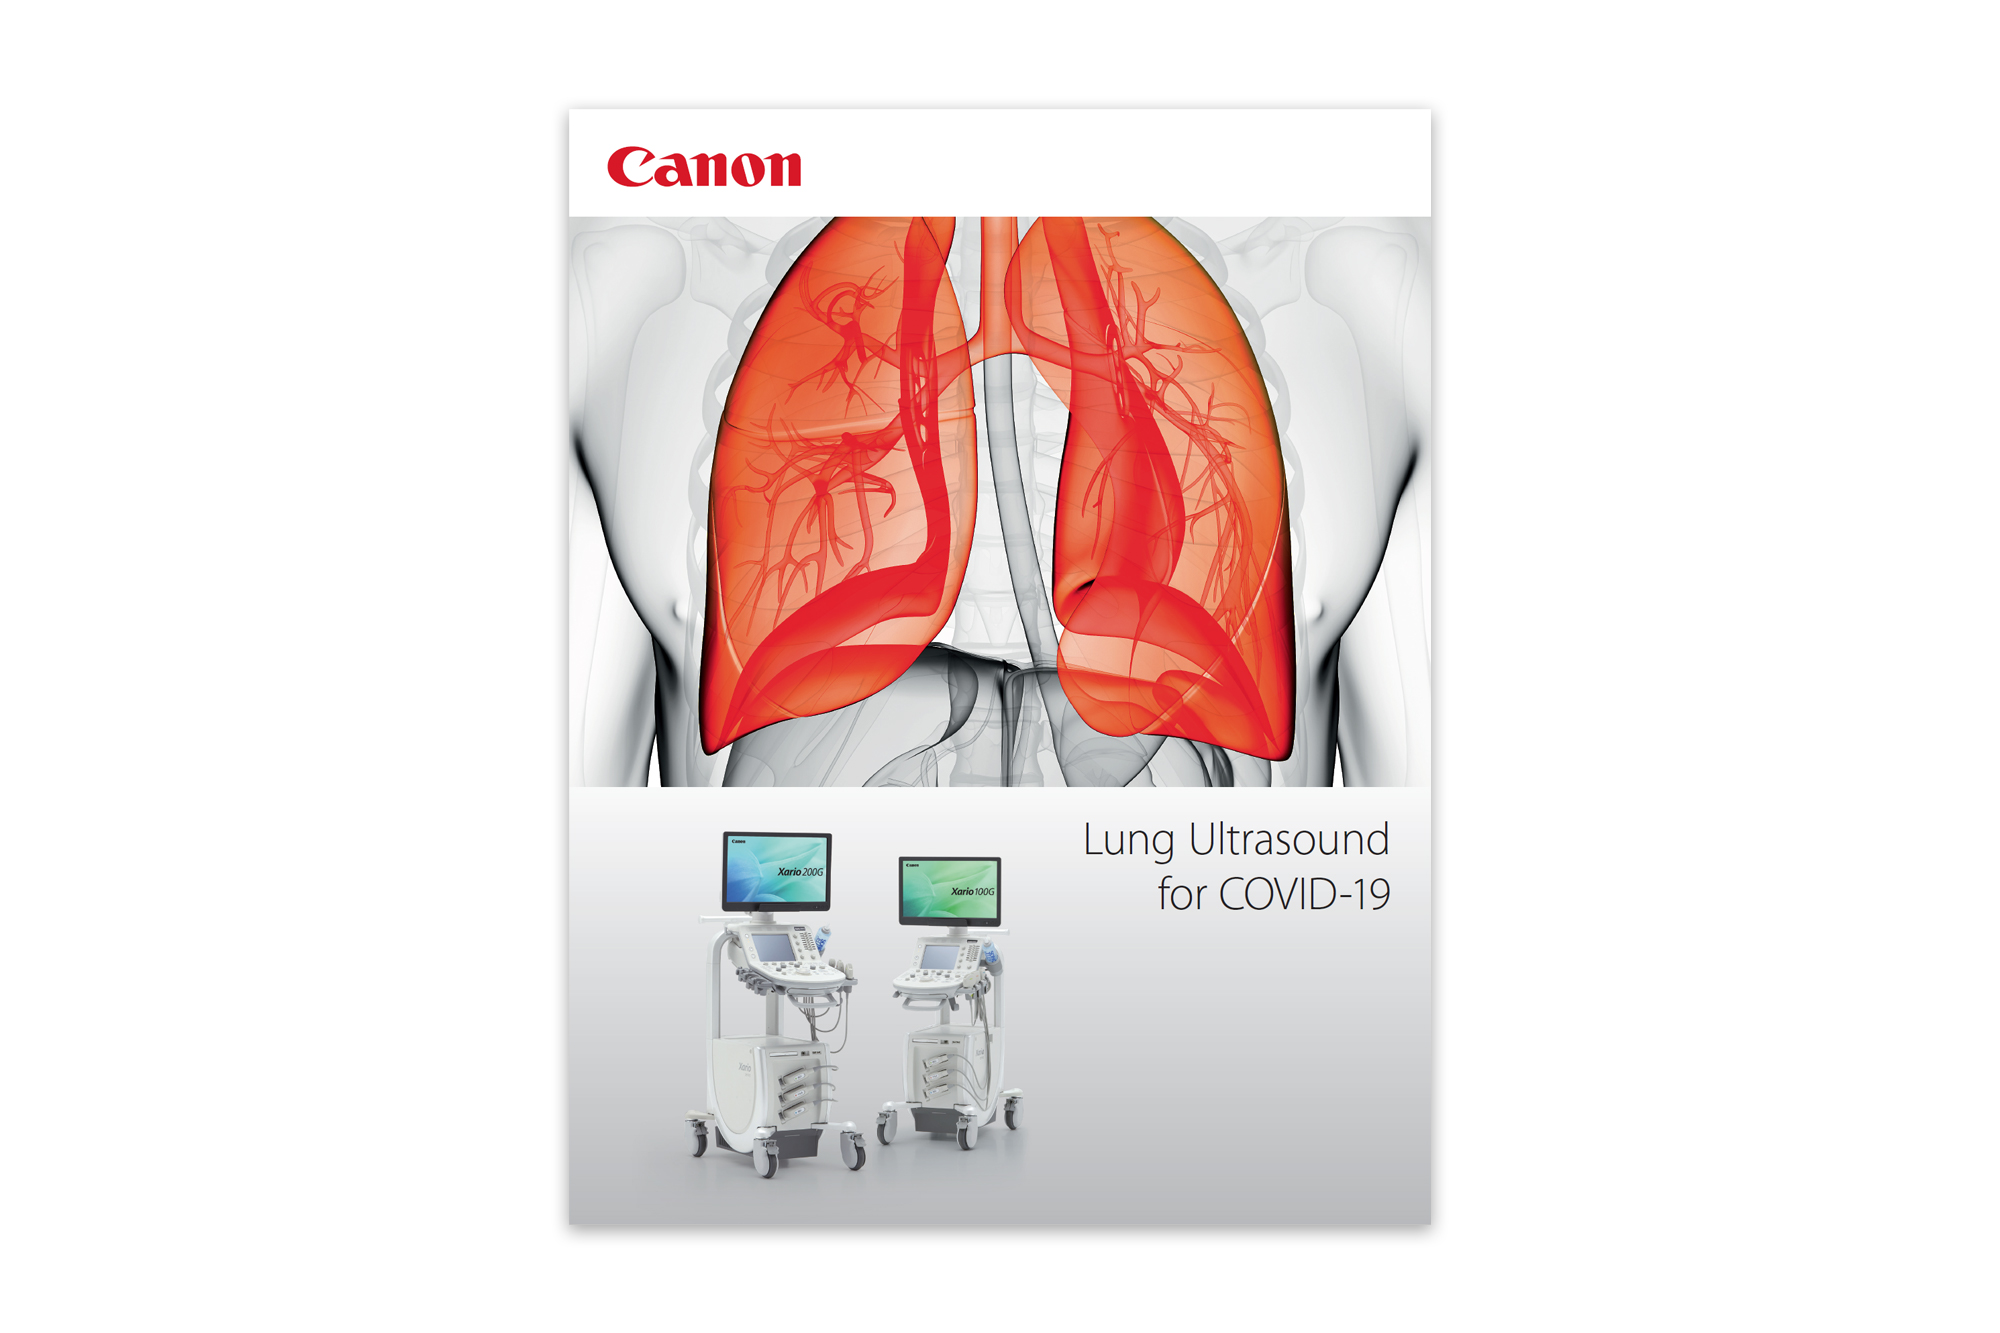 Lung Ultrasound for COVID-19